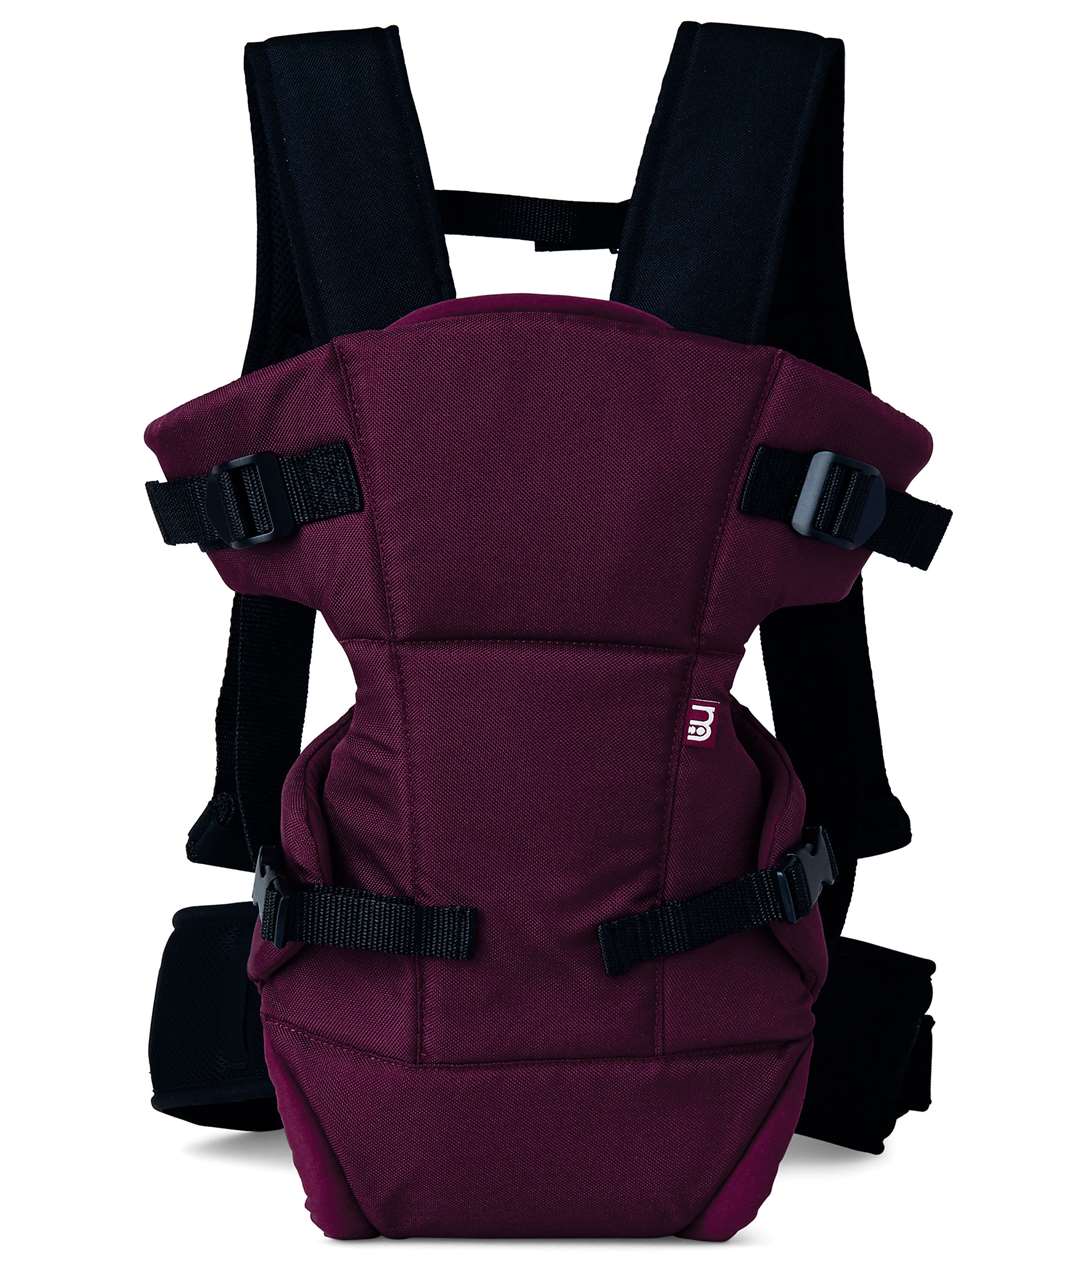 Mothercare Three Position Baby Carrier